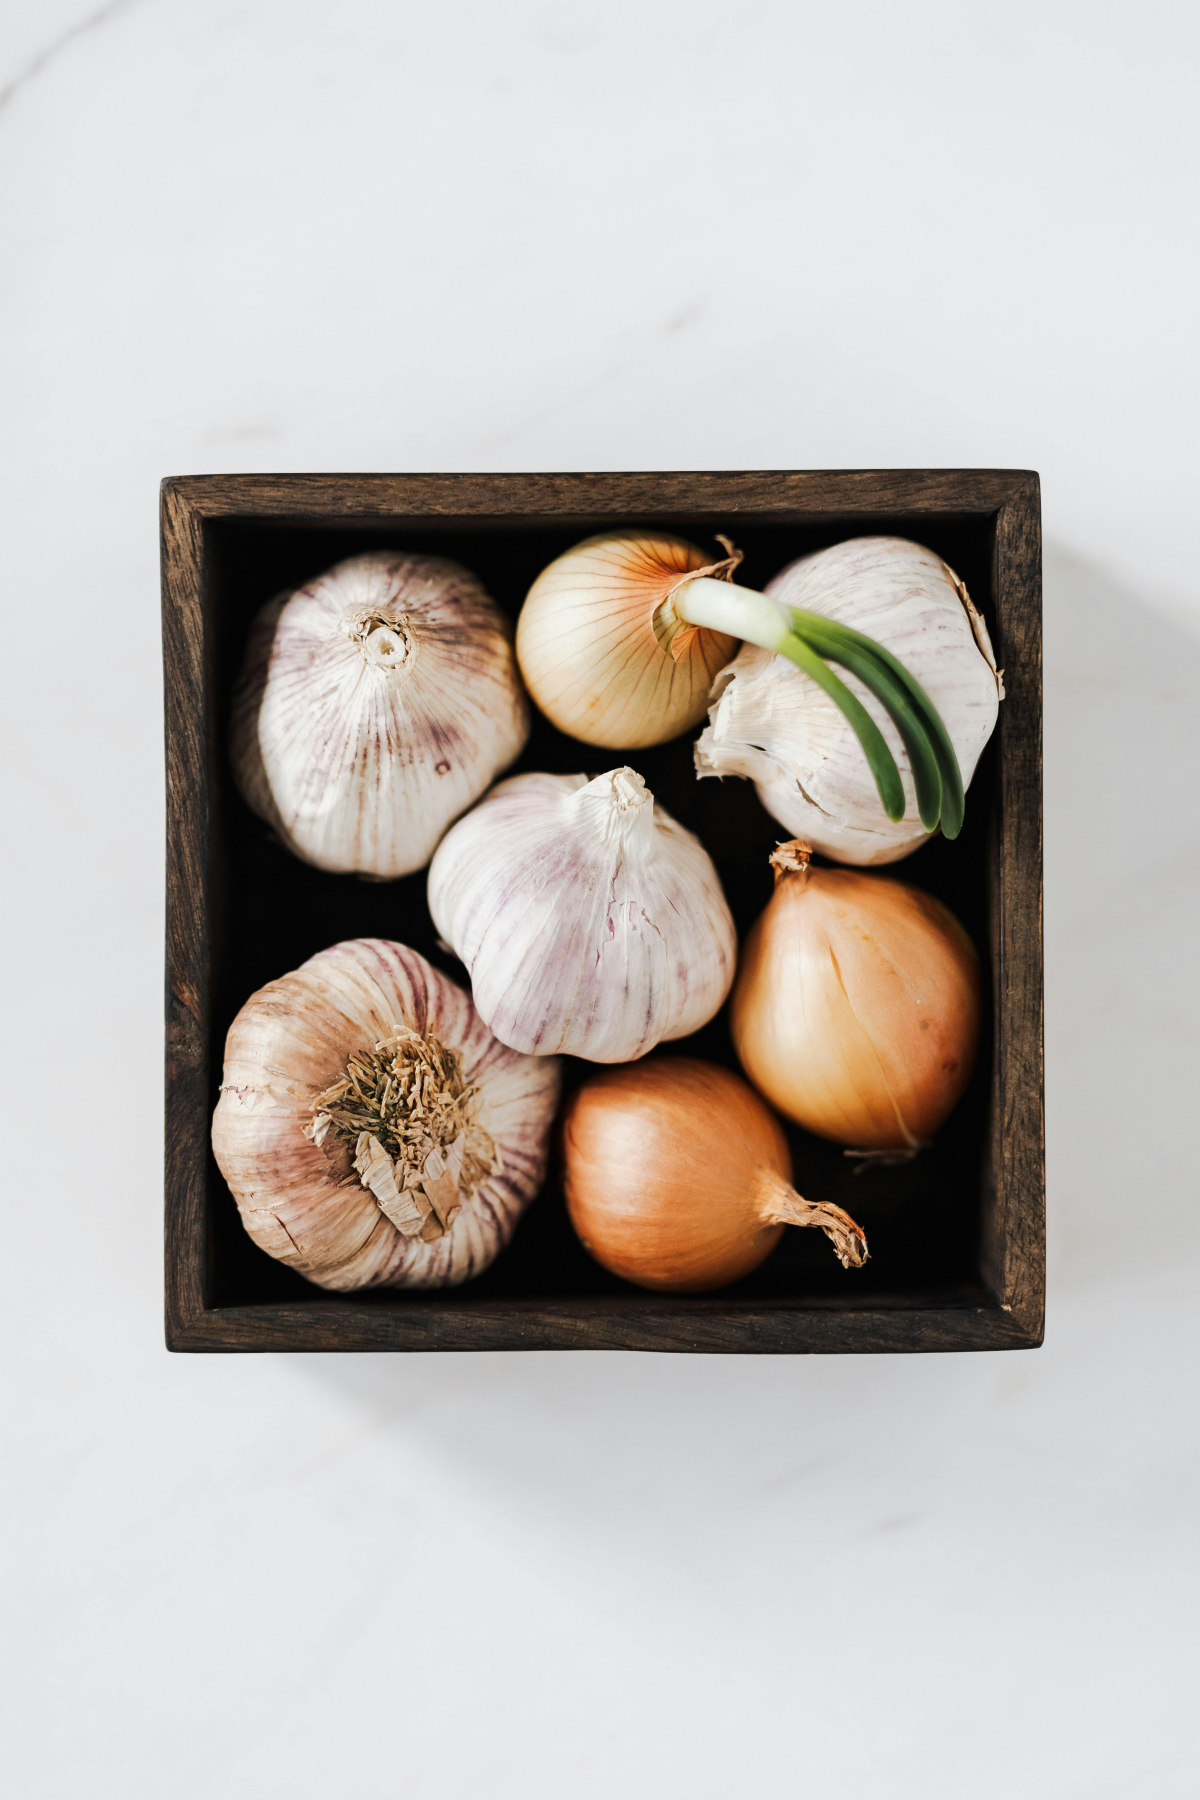 onions and garlic in a box